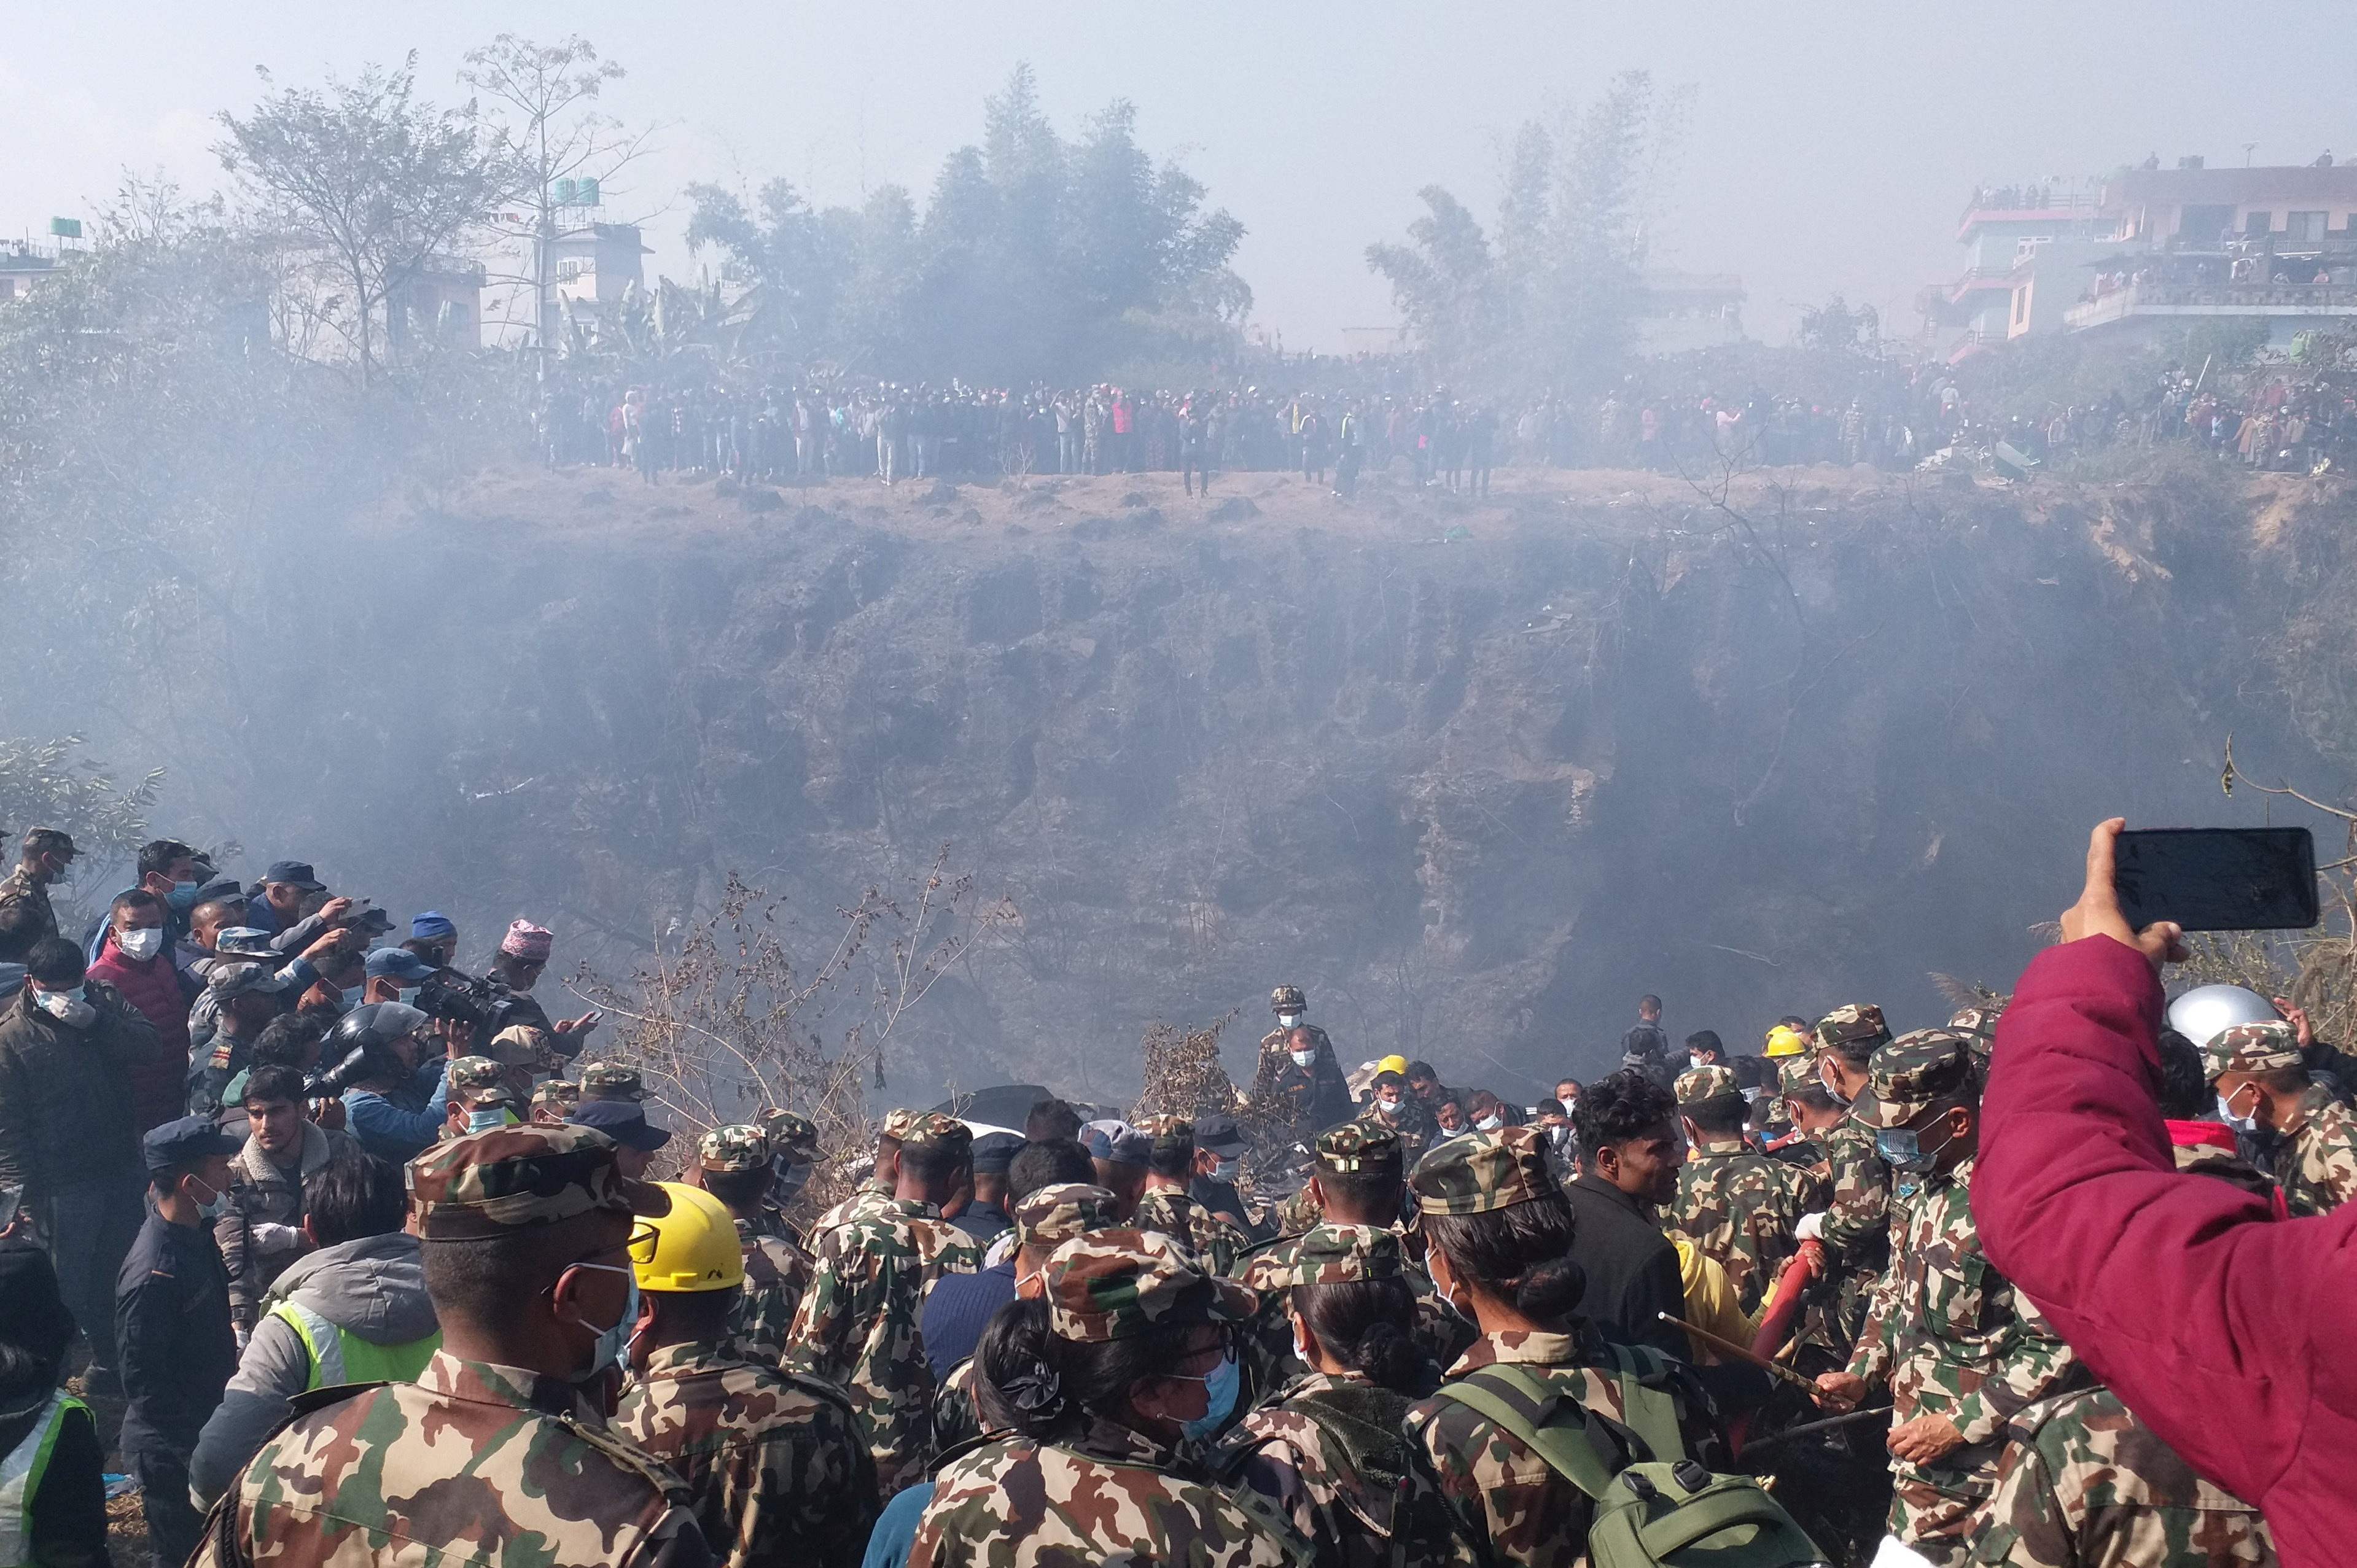 Nepalese authorities have recovered at least 25 bodies since the crash, Nepal Police Sub-Inspector Rudra Thapa said.  (Reuters)